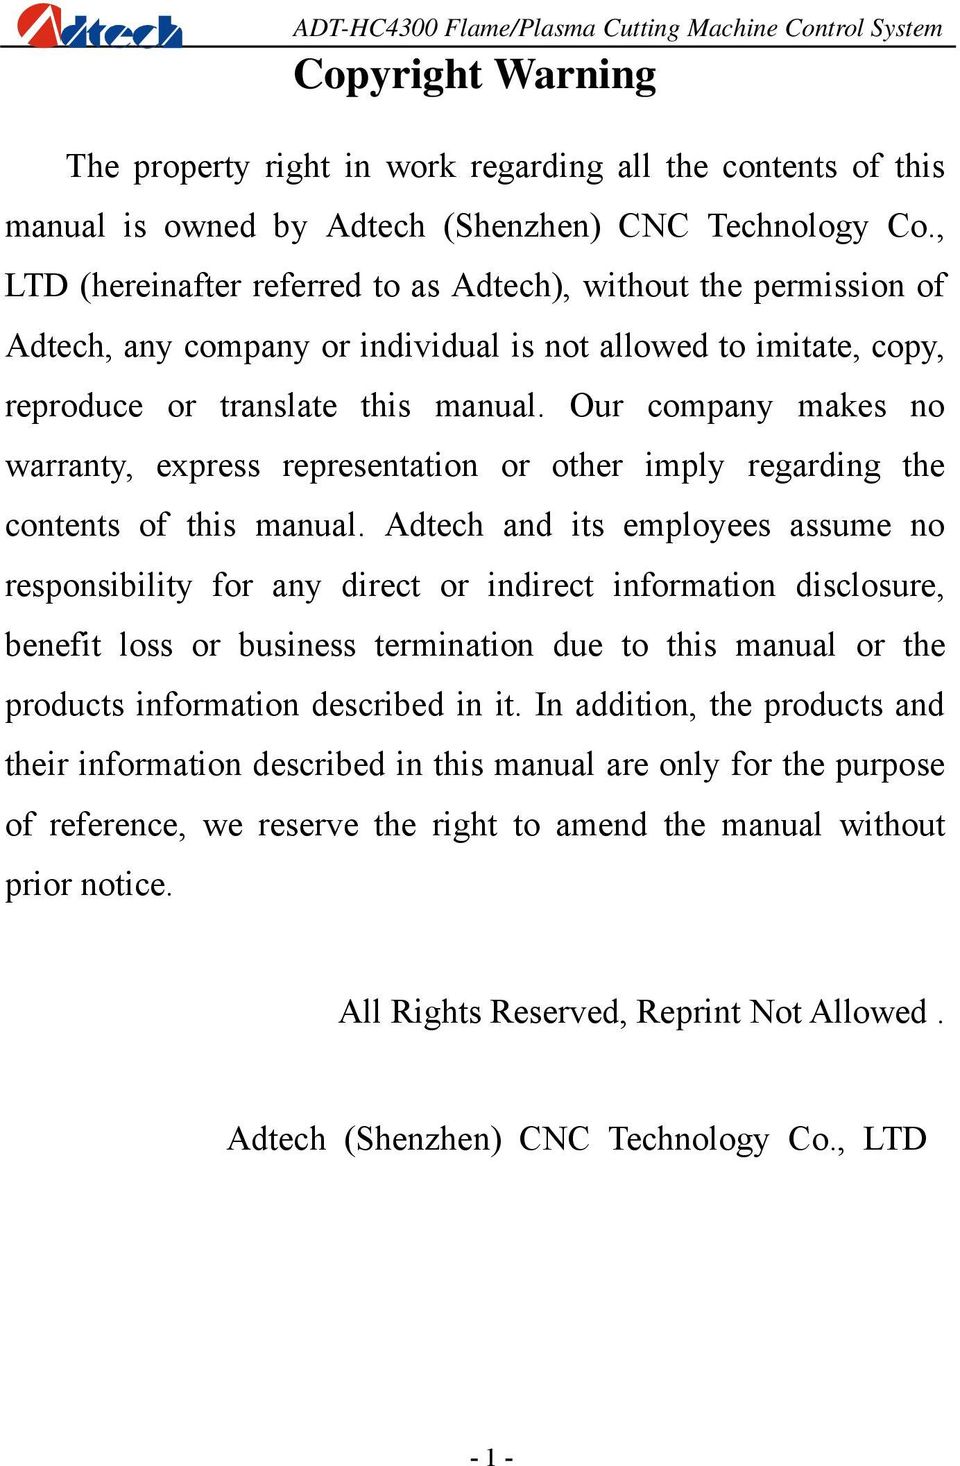 Our company makes no warranty, express representation or other imply regarding the contents of this manual.